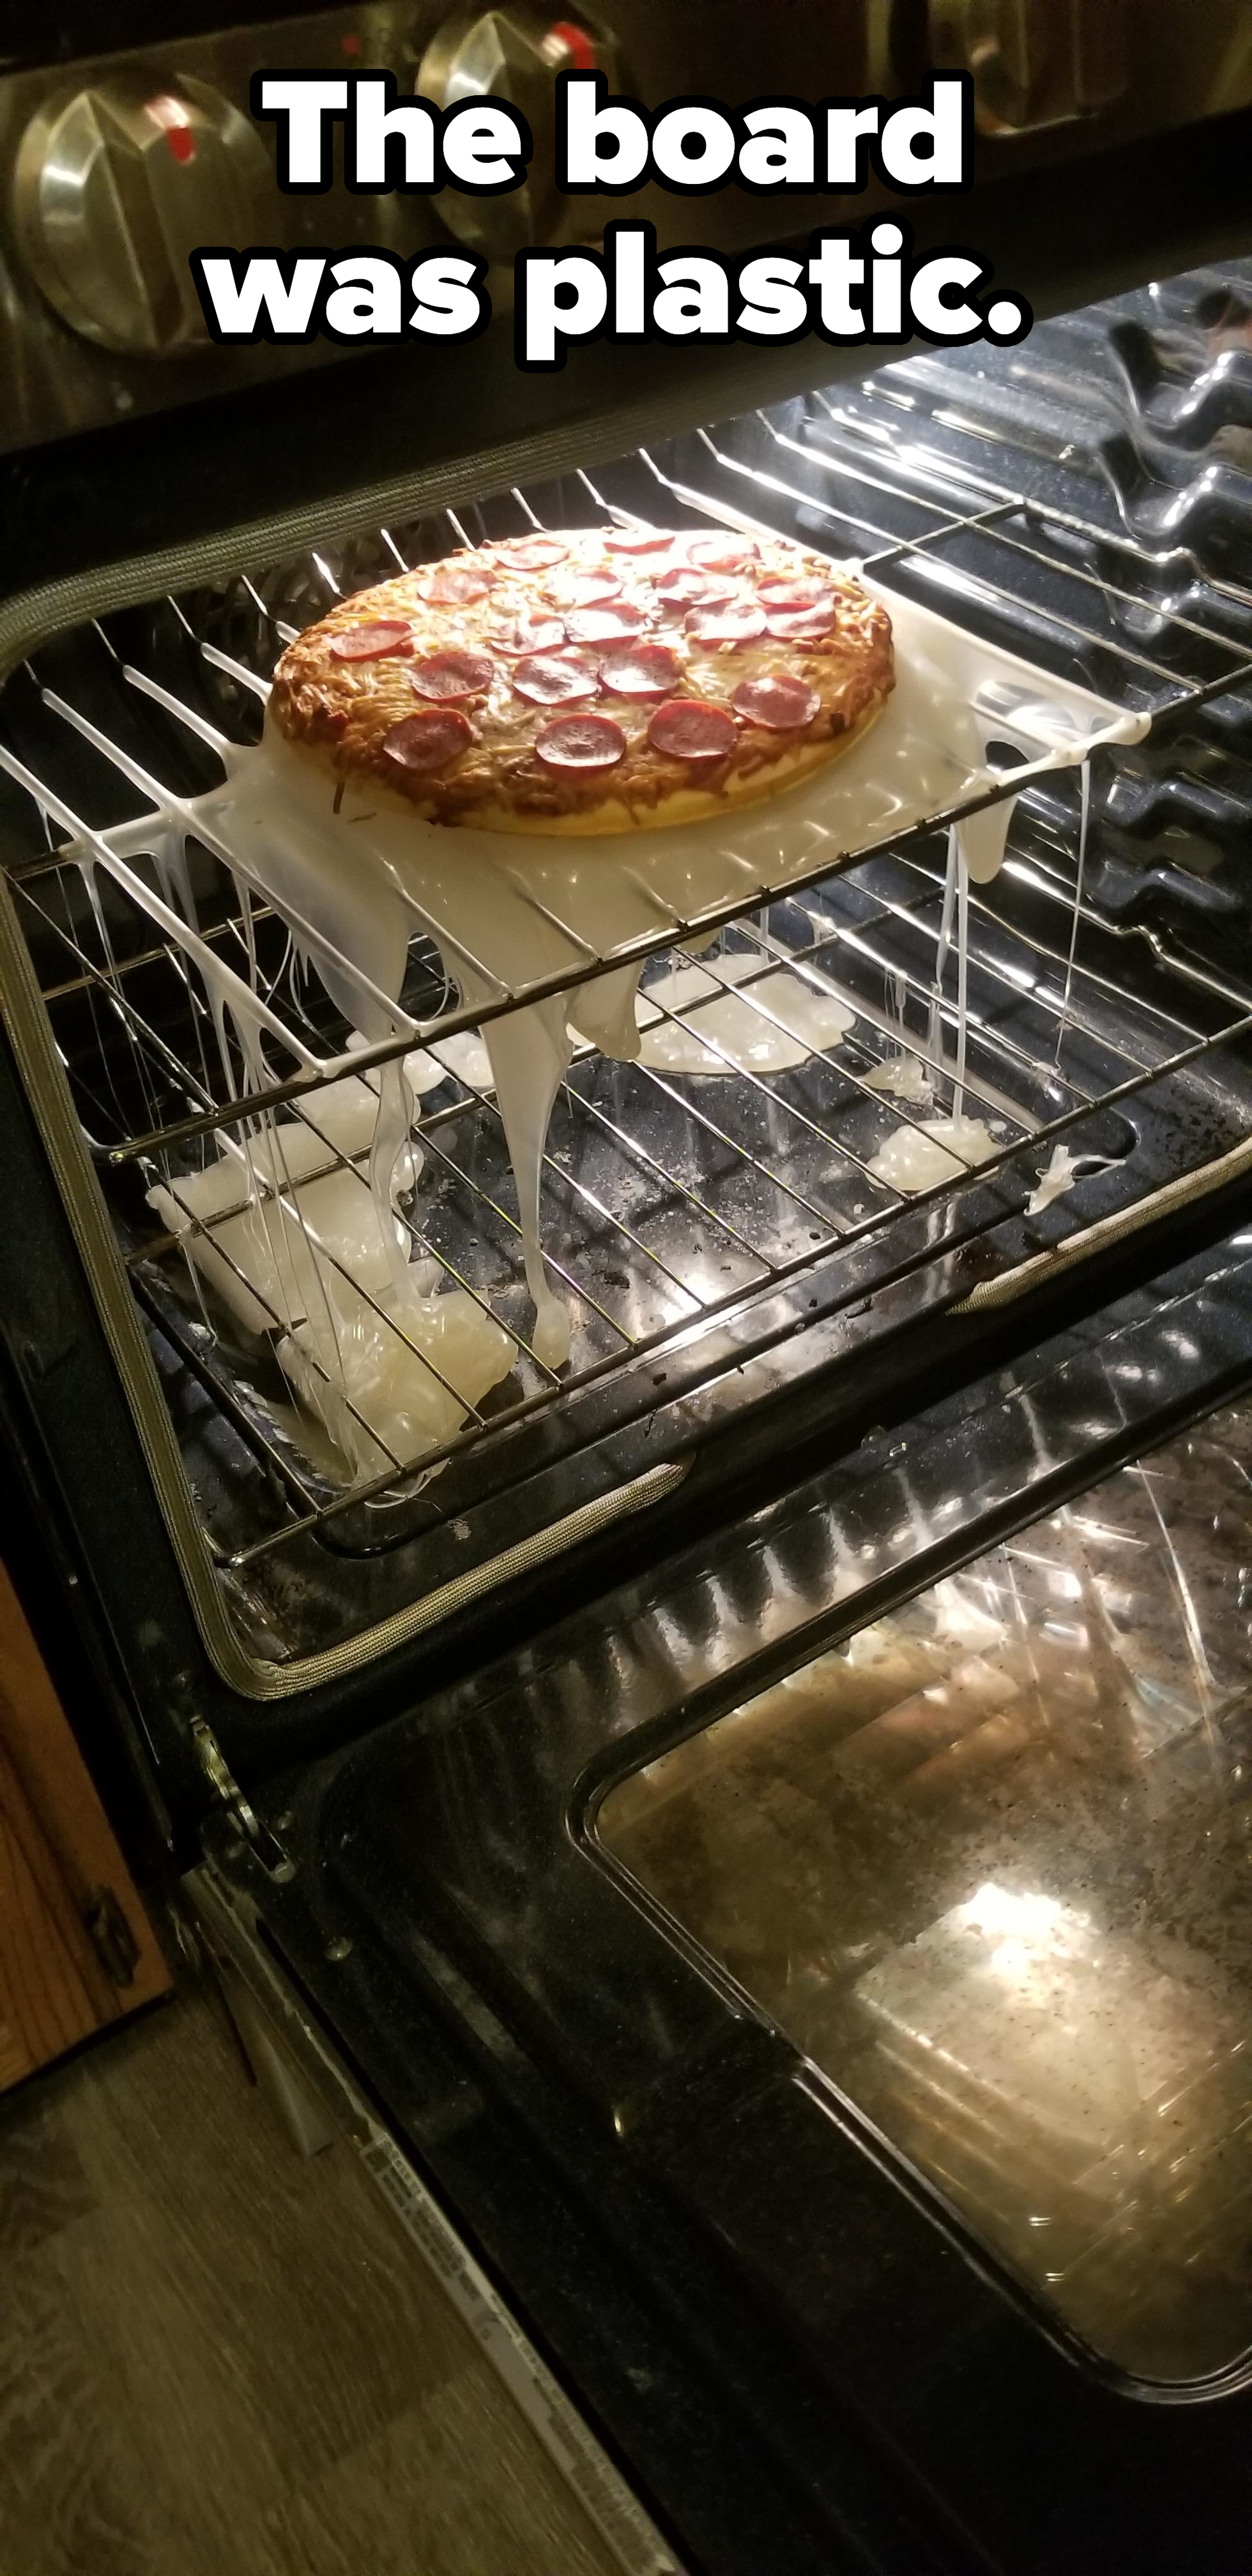 A pizza in an oven on a plastic tray that has melted through the oven rack